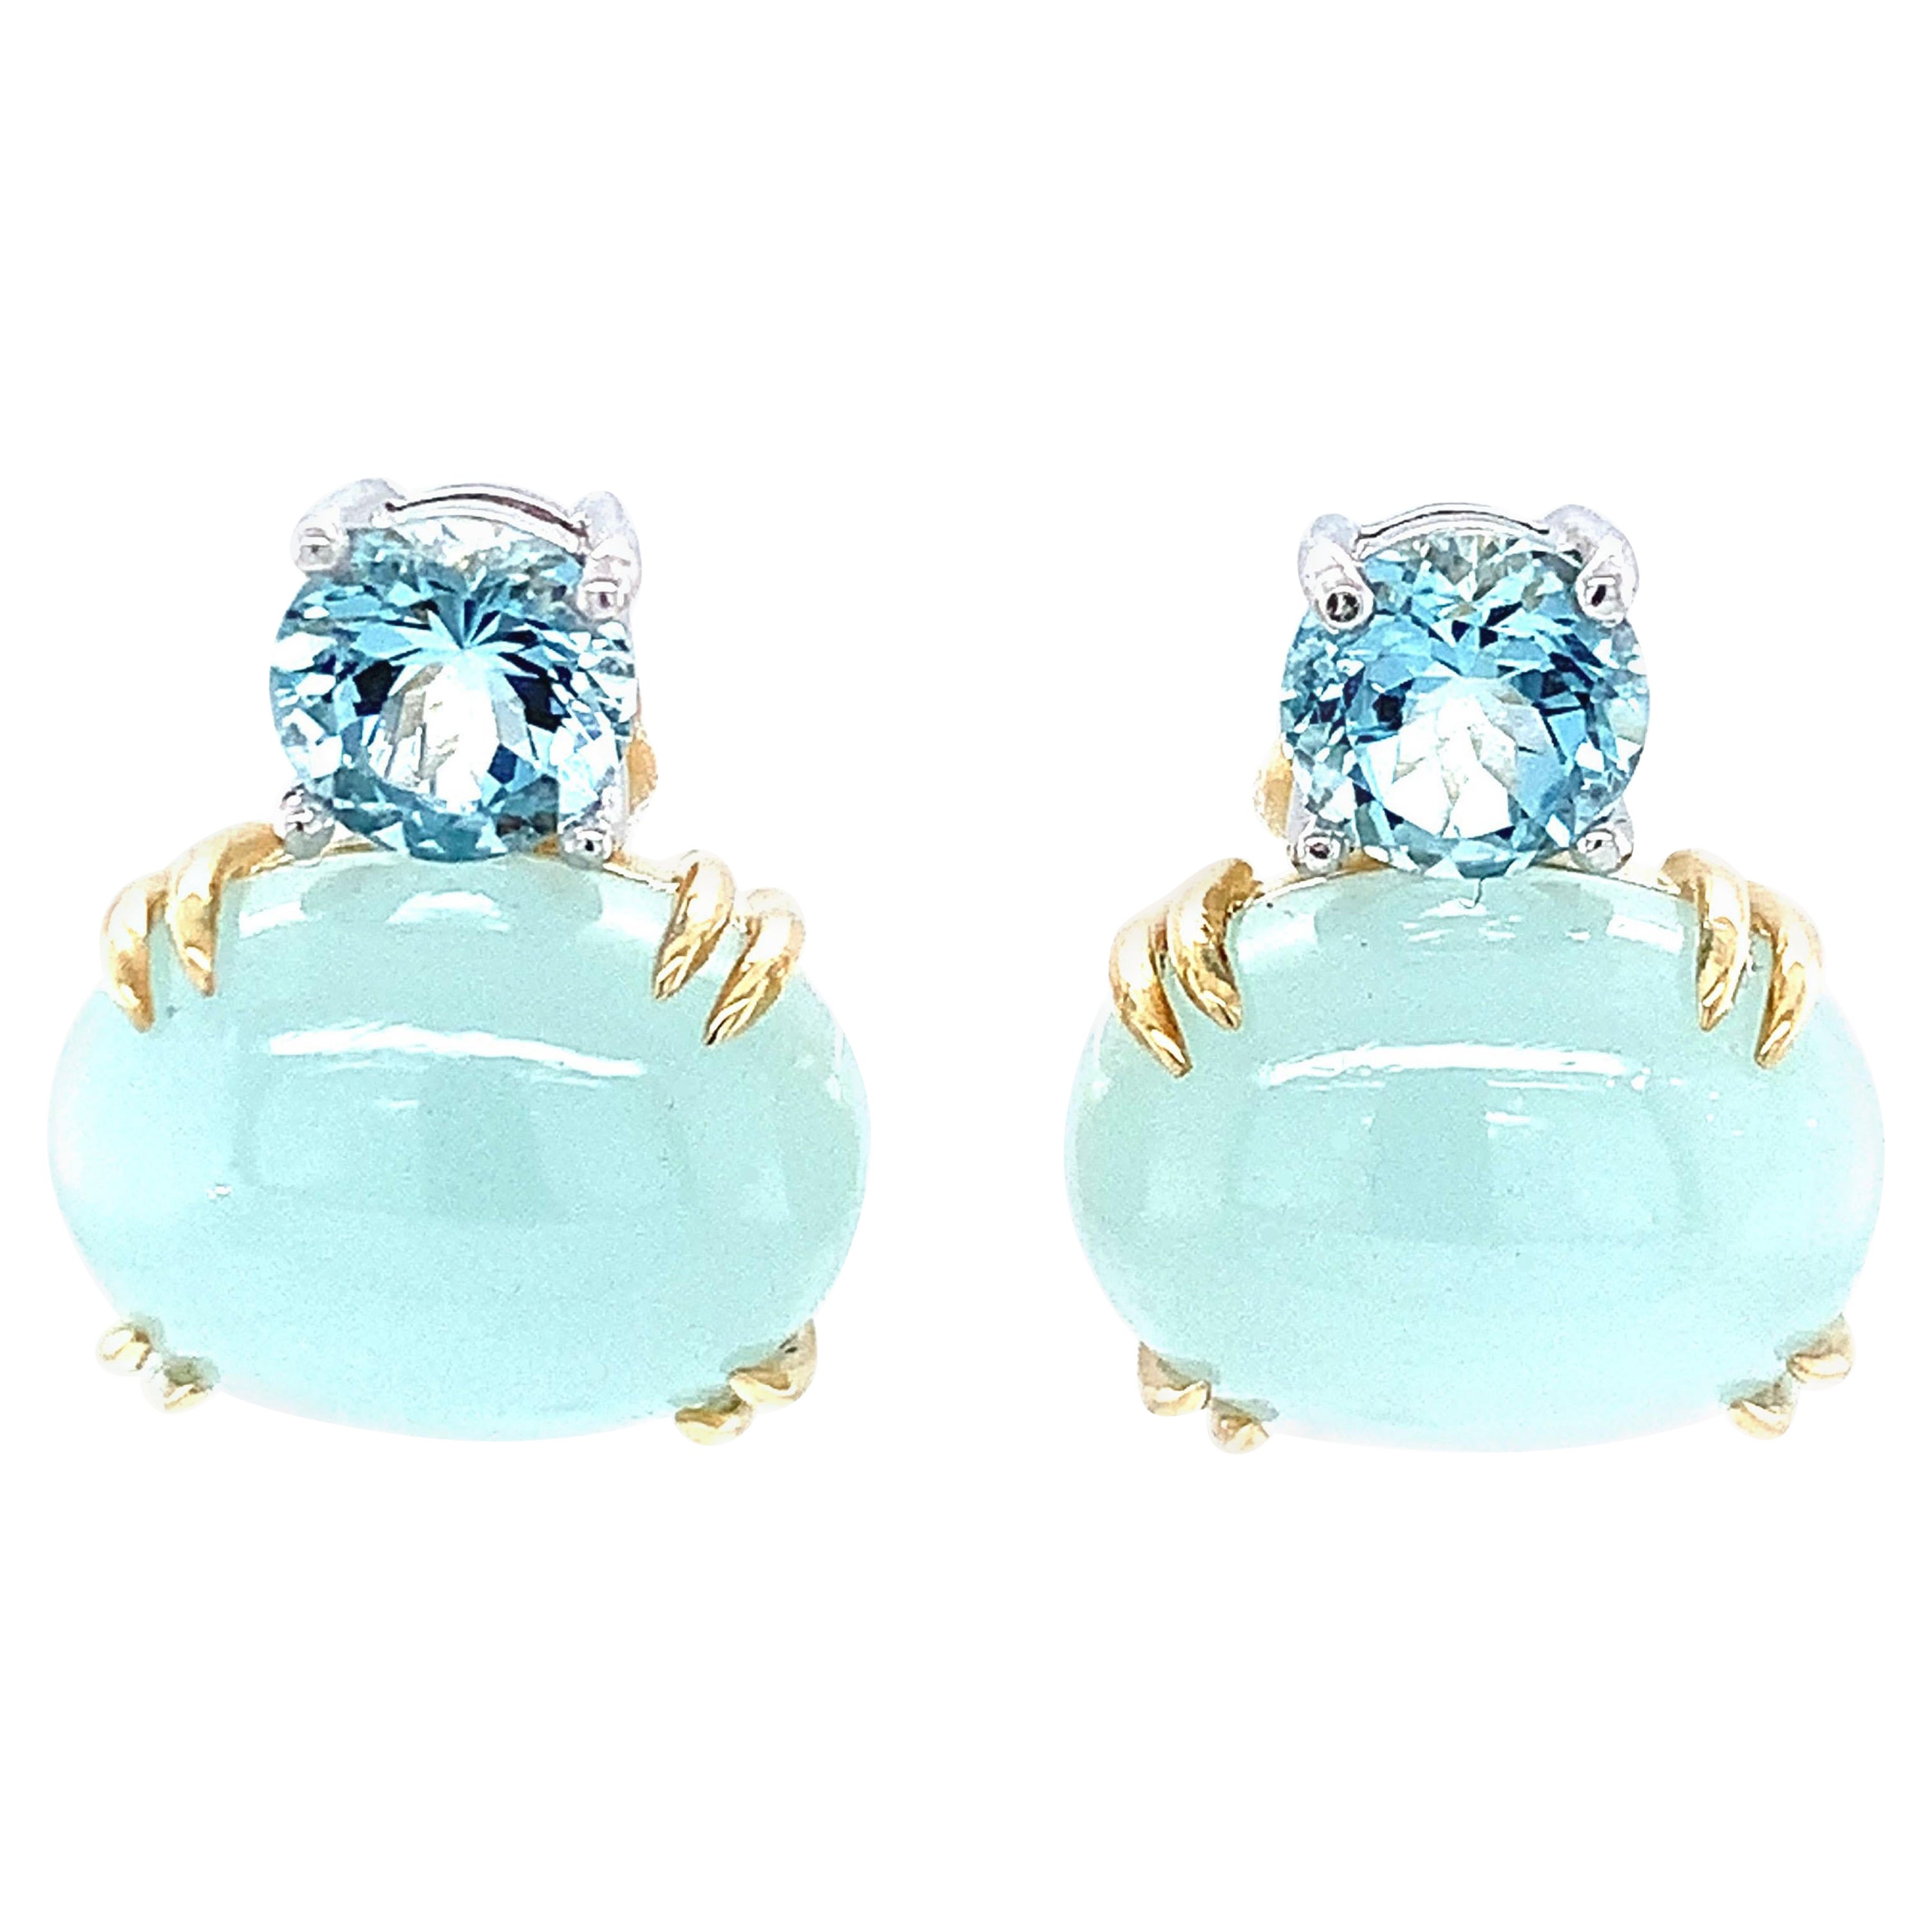 Faceted and Cabochon Aquamarine Drop Earrings in White and Yellow Gold